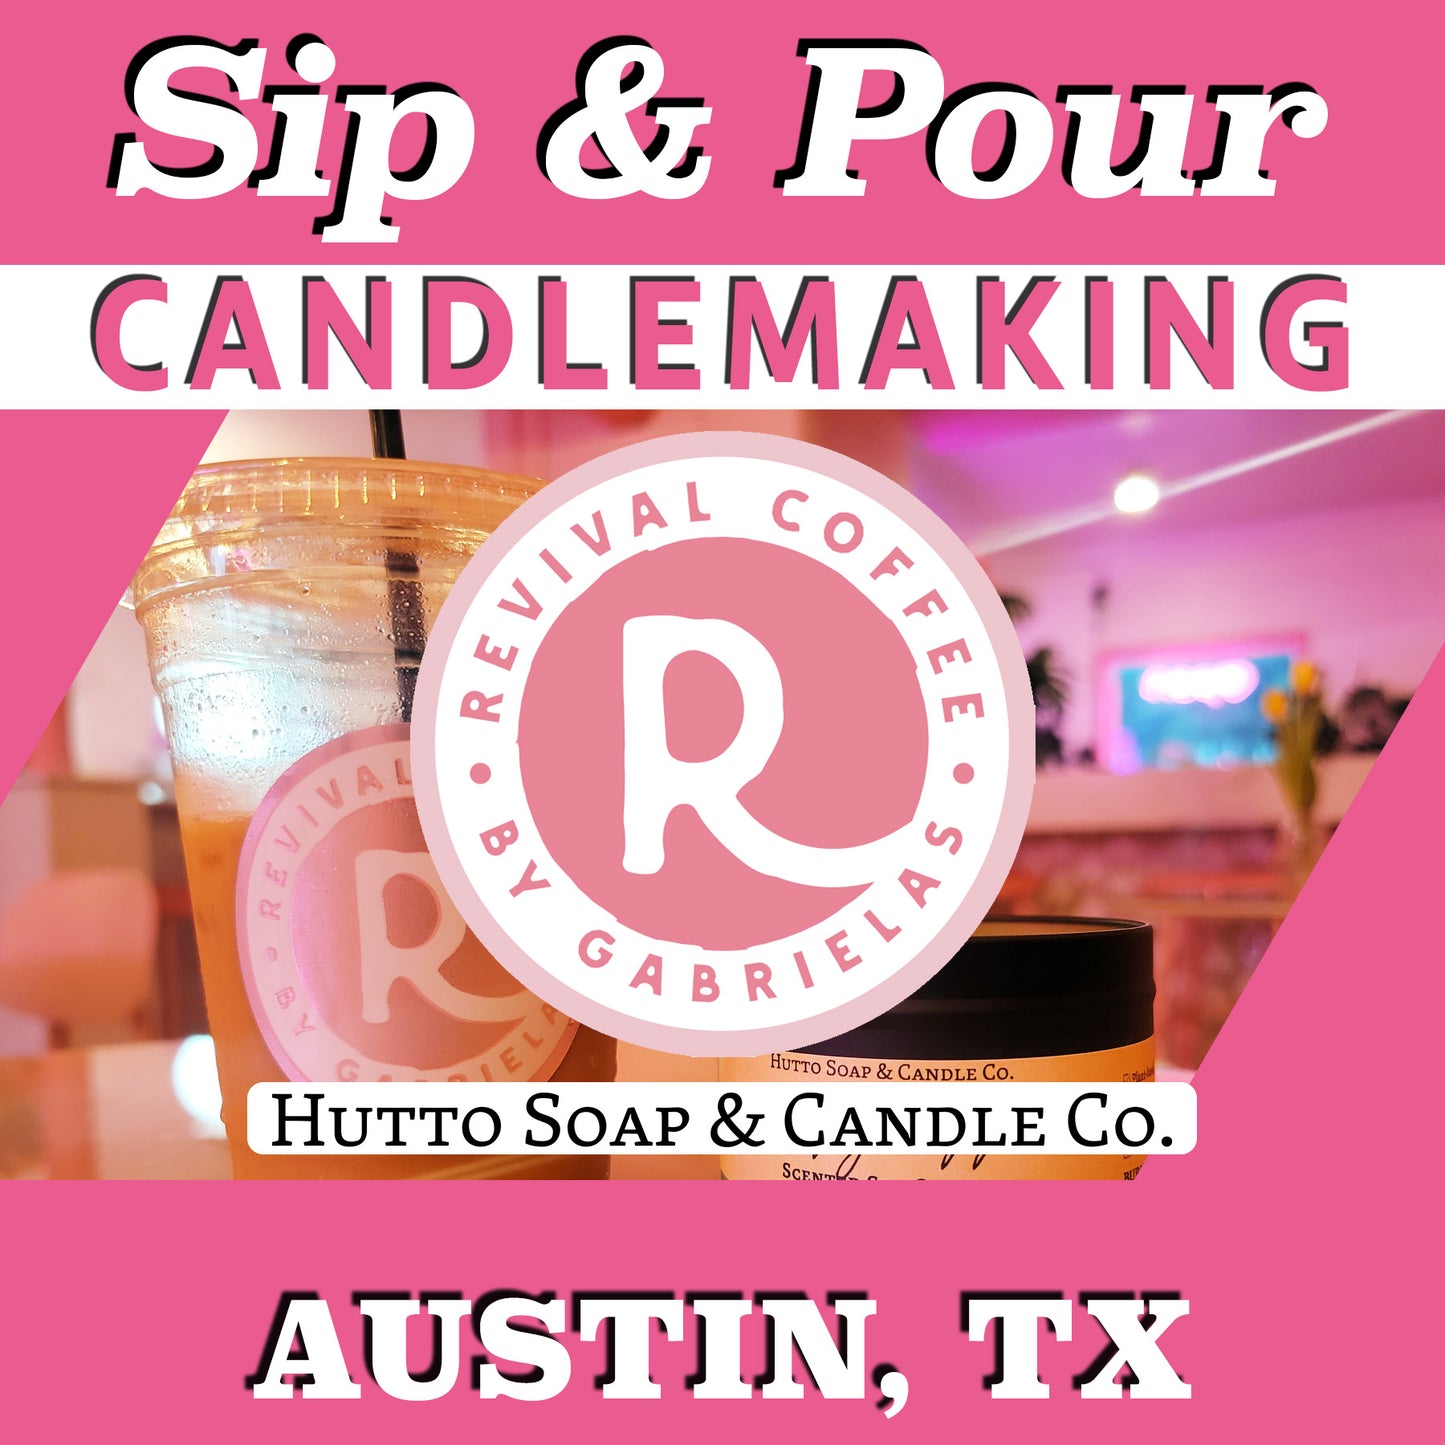 Candlemaking Sip & Pour at Revival Coffee